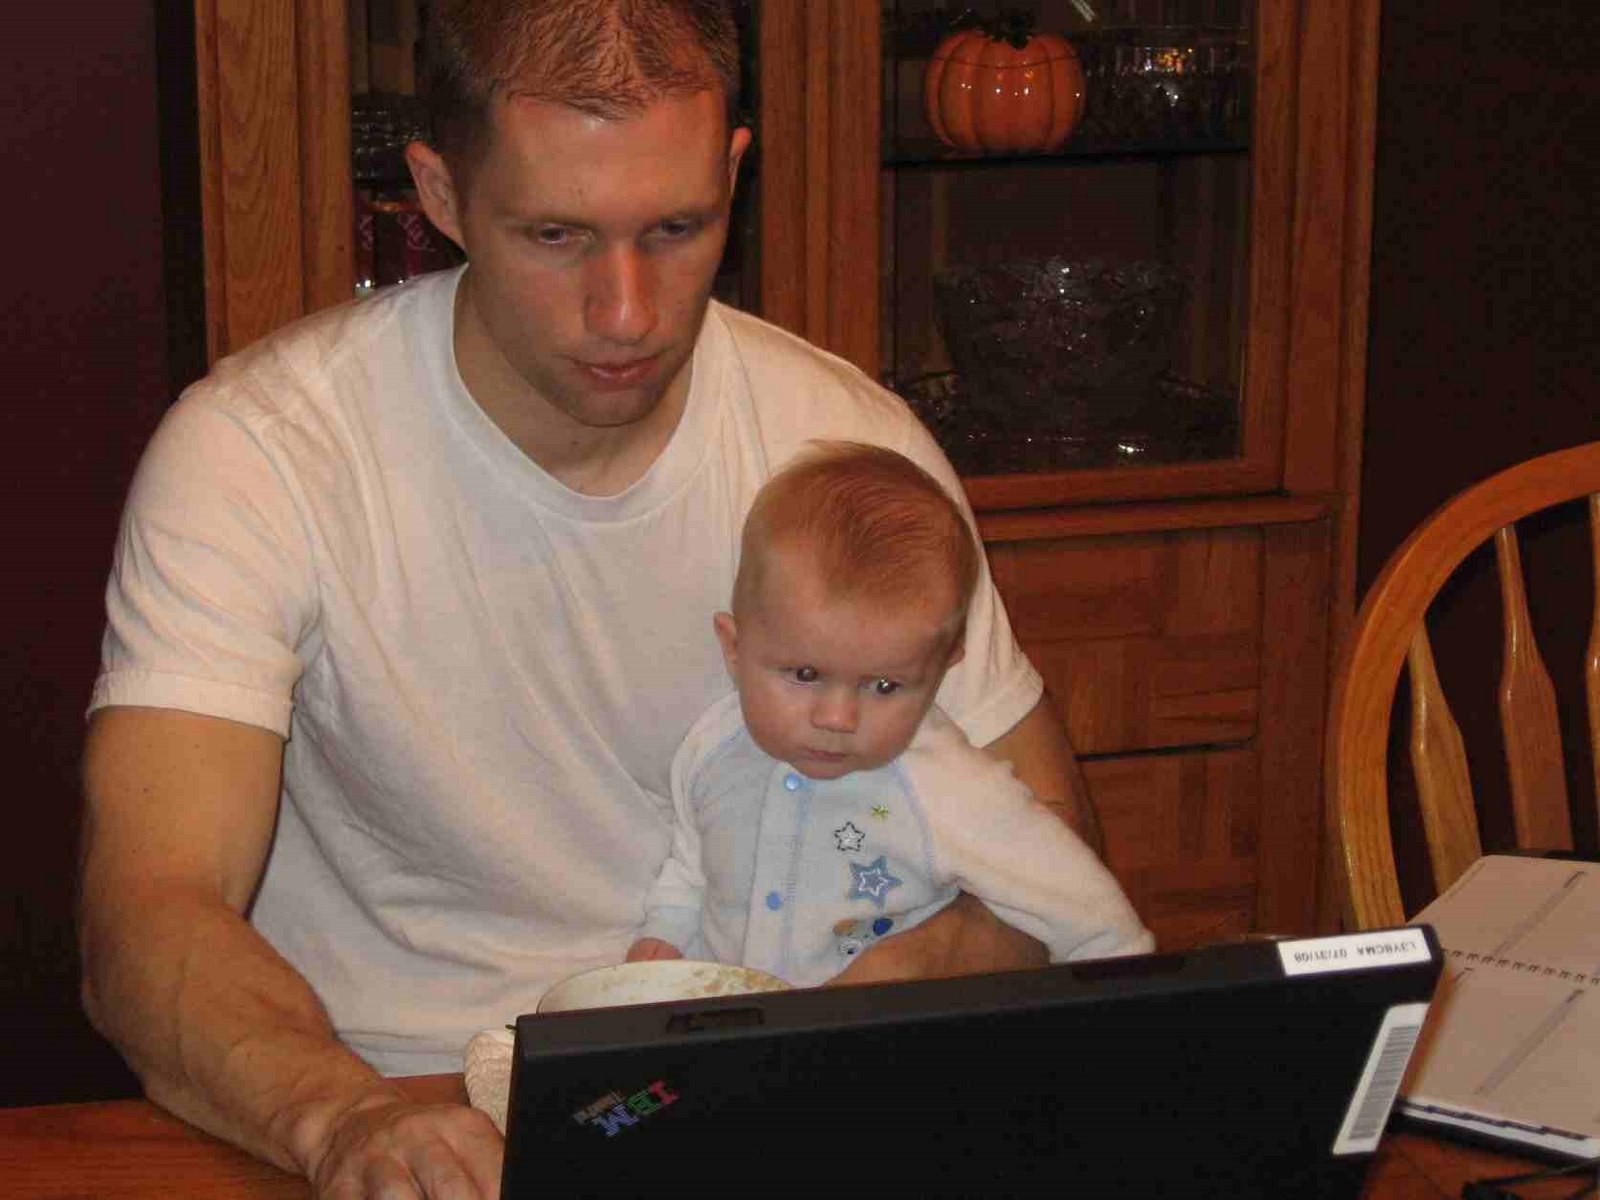 [Linc_with_dad_at_computer.jpg]